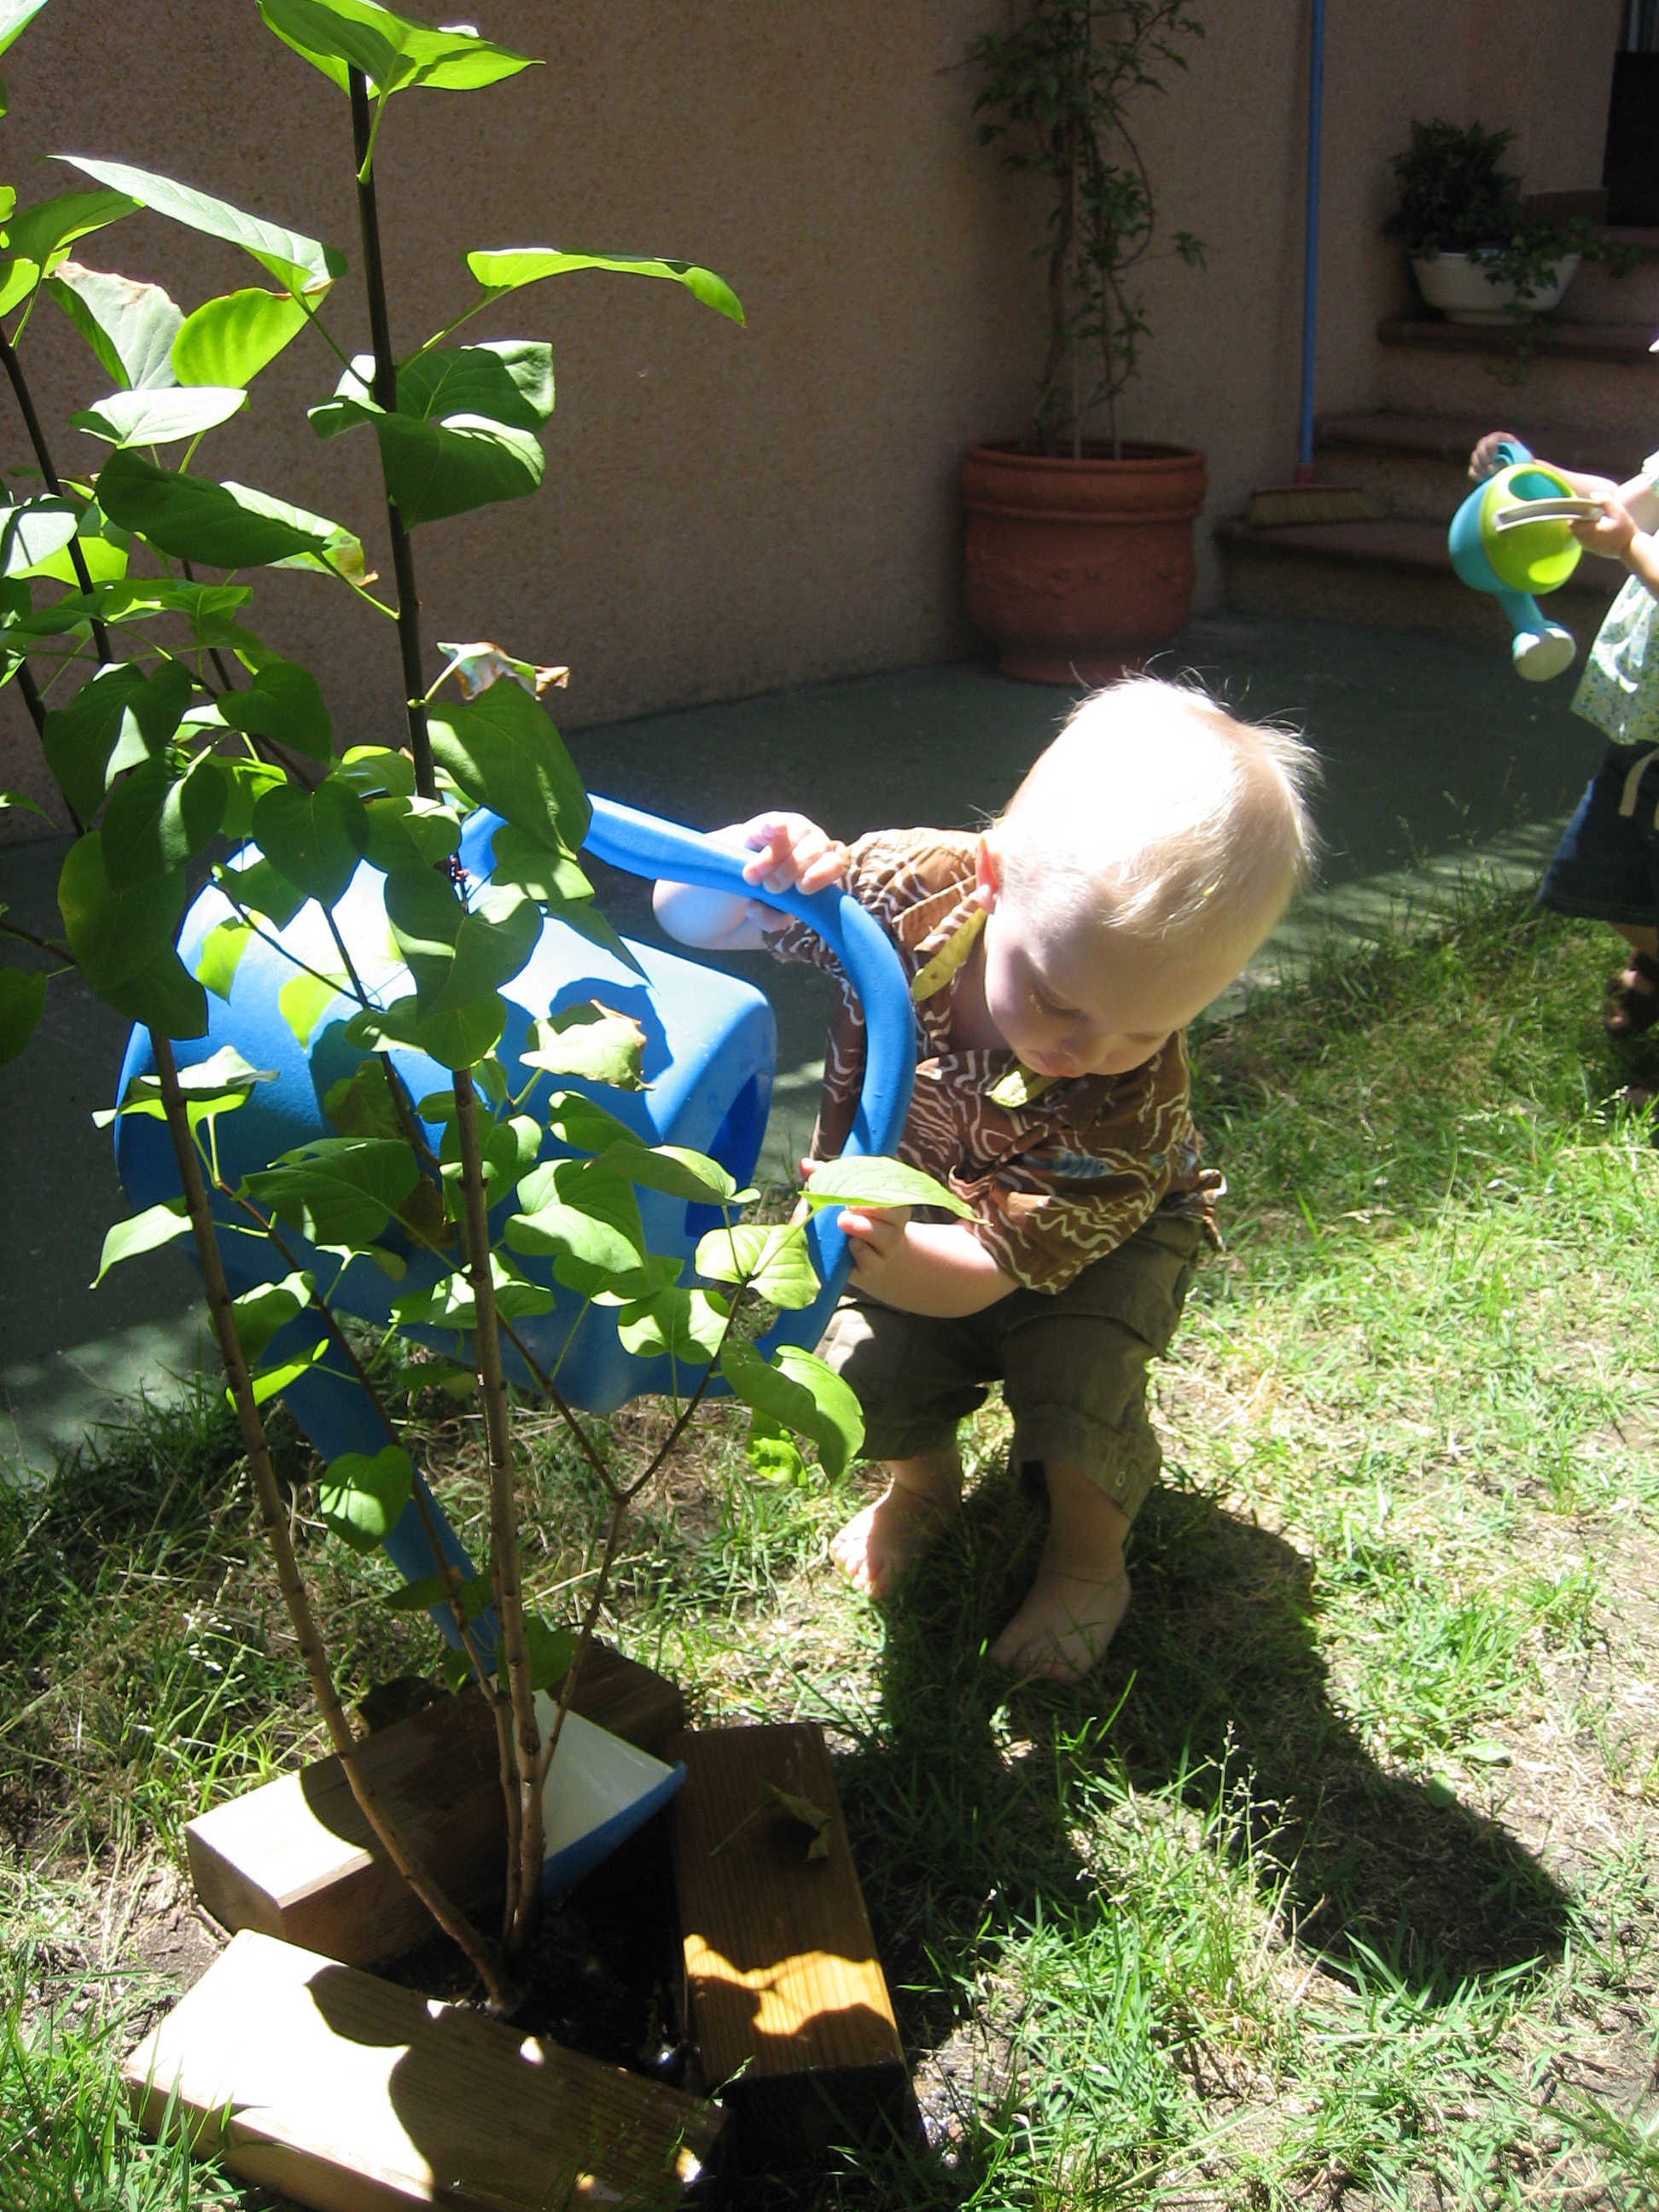 Watering the tree.